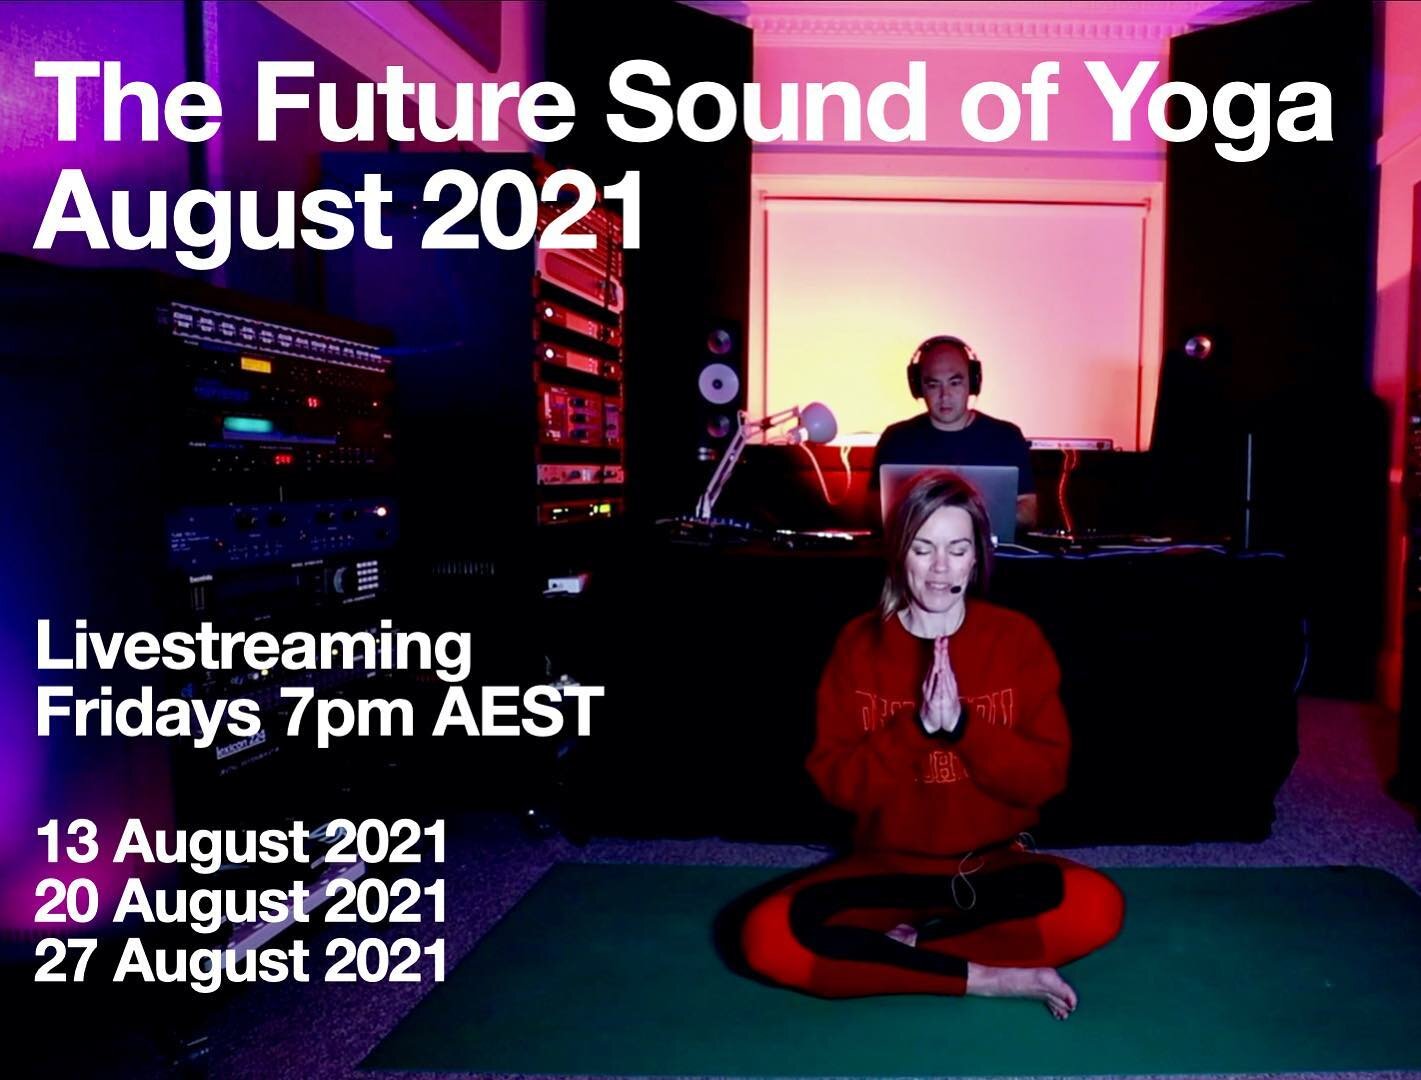 Looking forward to DJing 3x more @futuresoundofyoga livestreams later this month!

Wherever you are in the world, hopefully we can provide a lovely transition from the week into the weekend.

#futursoundofyoga #livestreaming #sydneylockdown